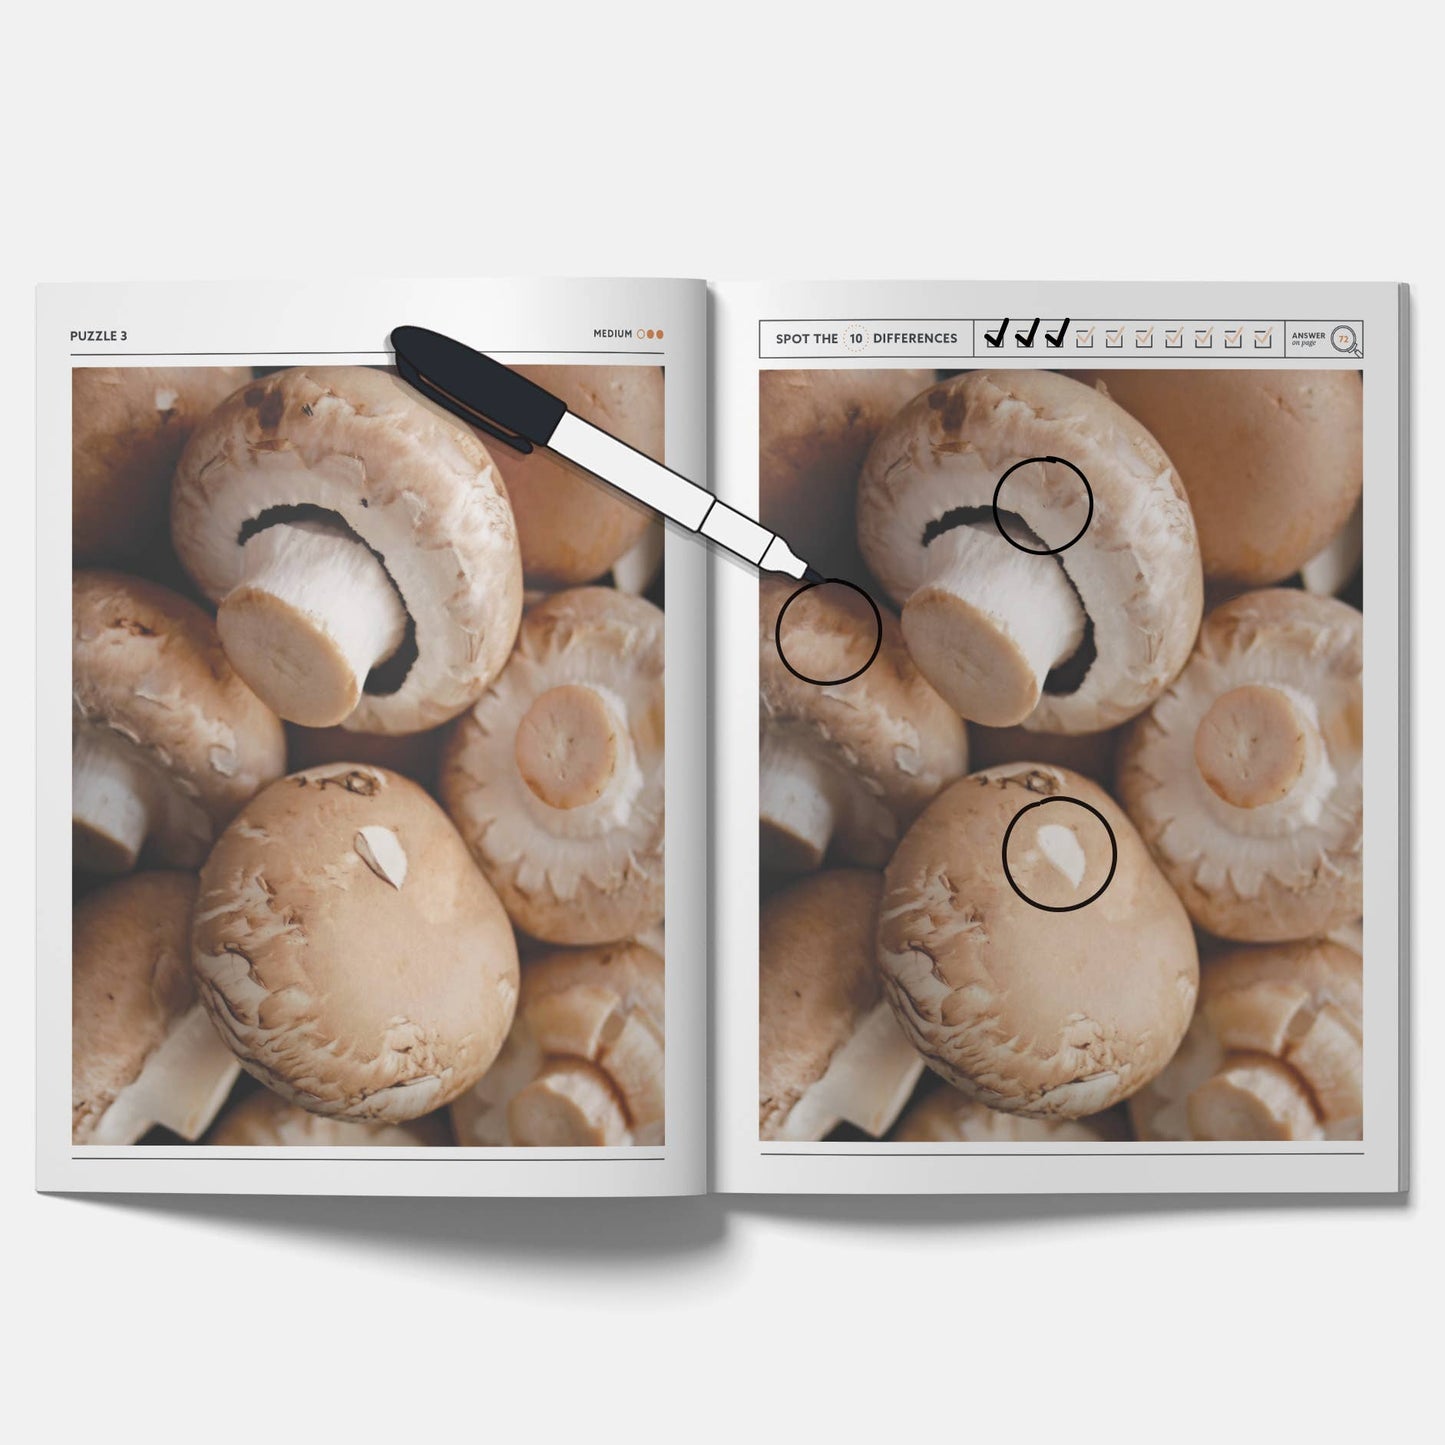 Mushroom Spot the Difference Puzzles, I Spy Activity Book